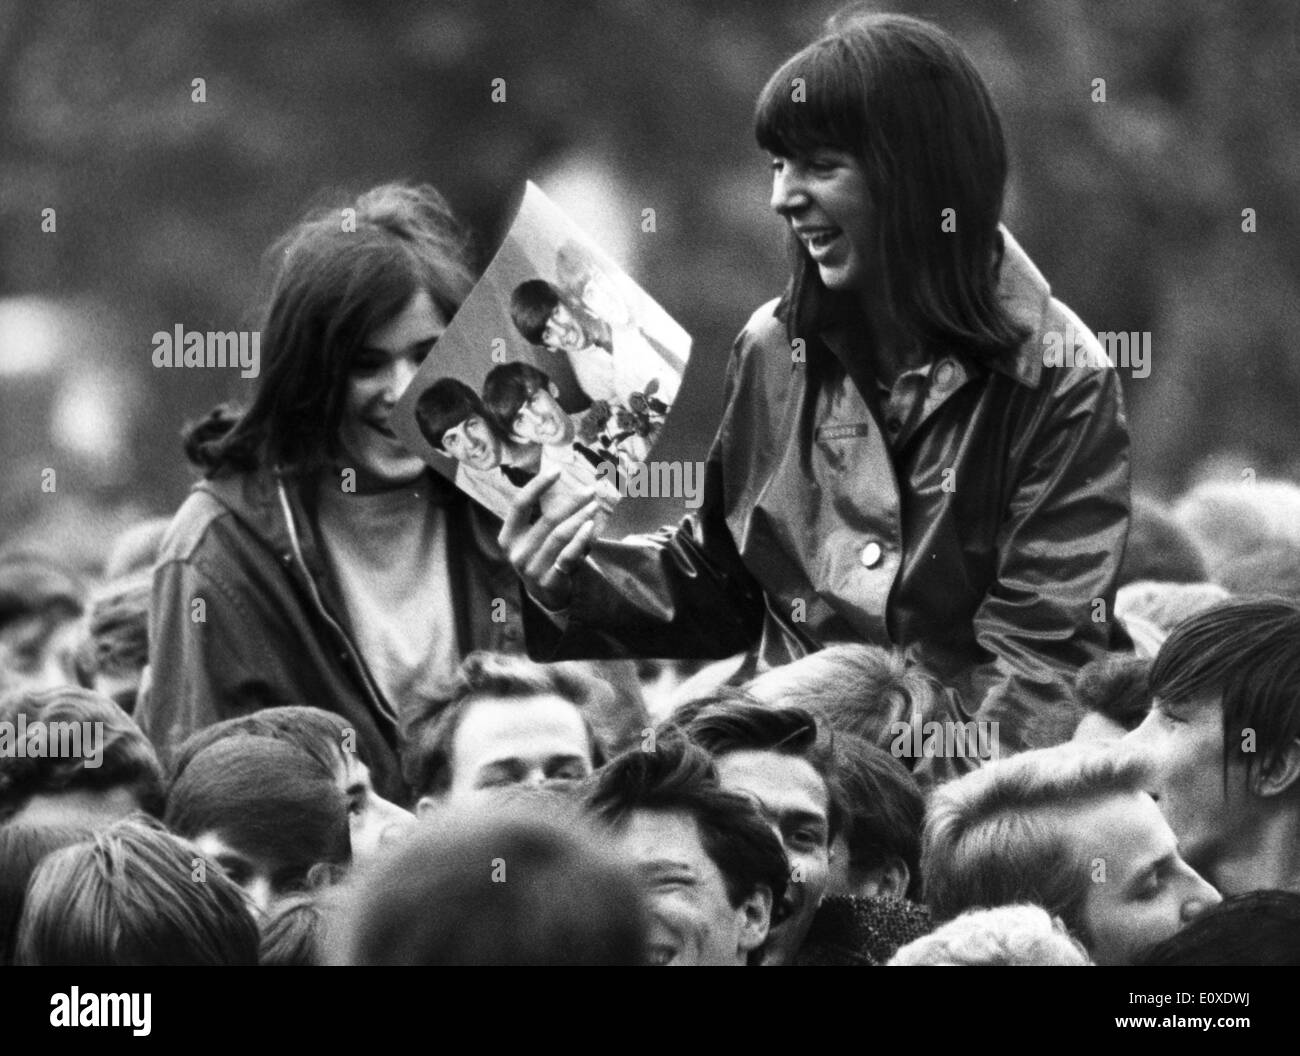 Young Beatles fans cheer at concert Stock Photo